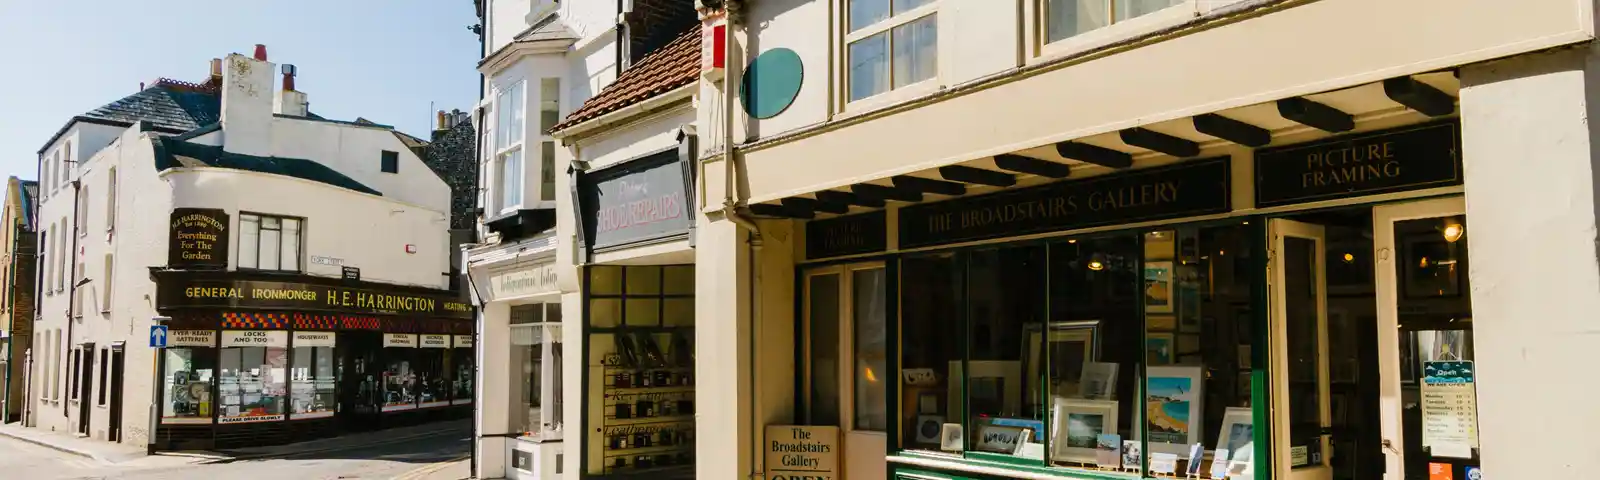 The Broadstairs Gallery